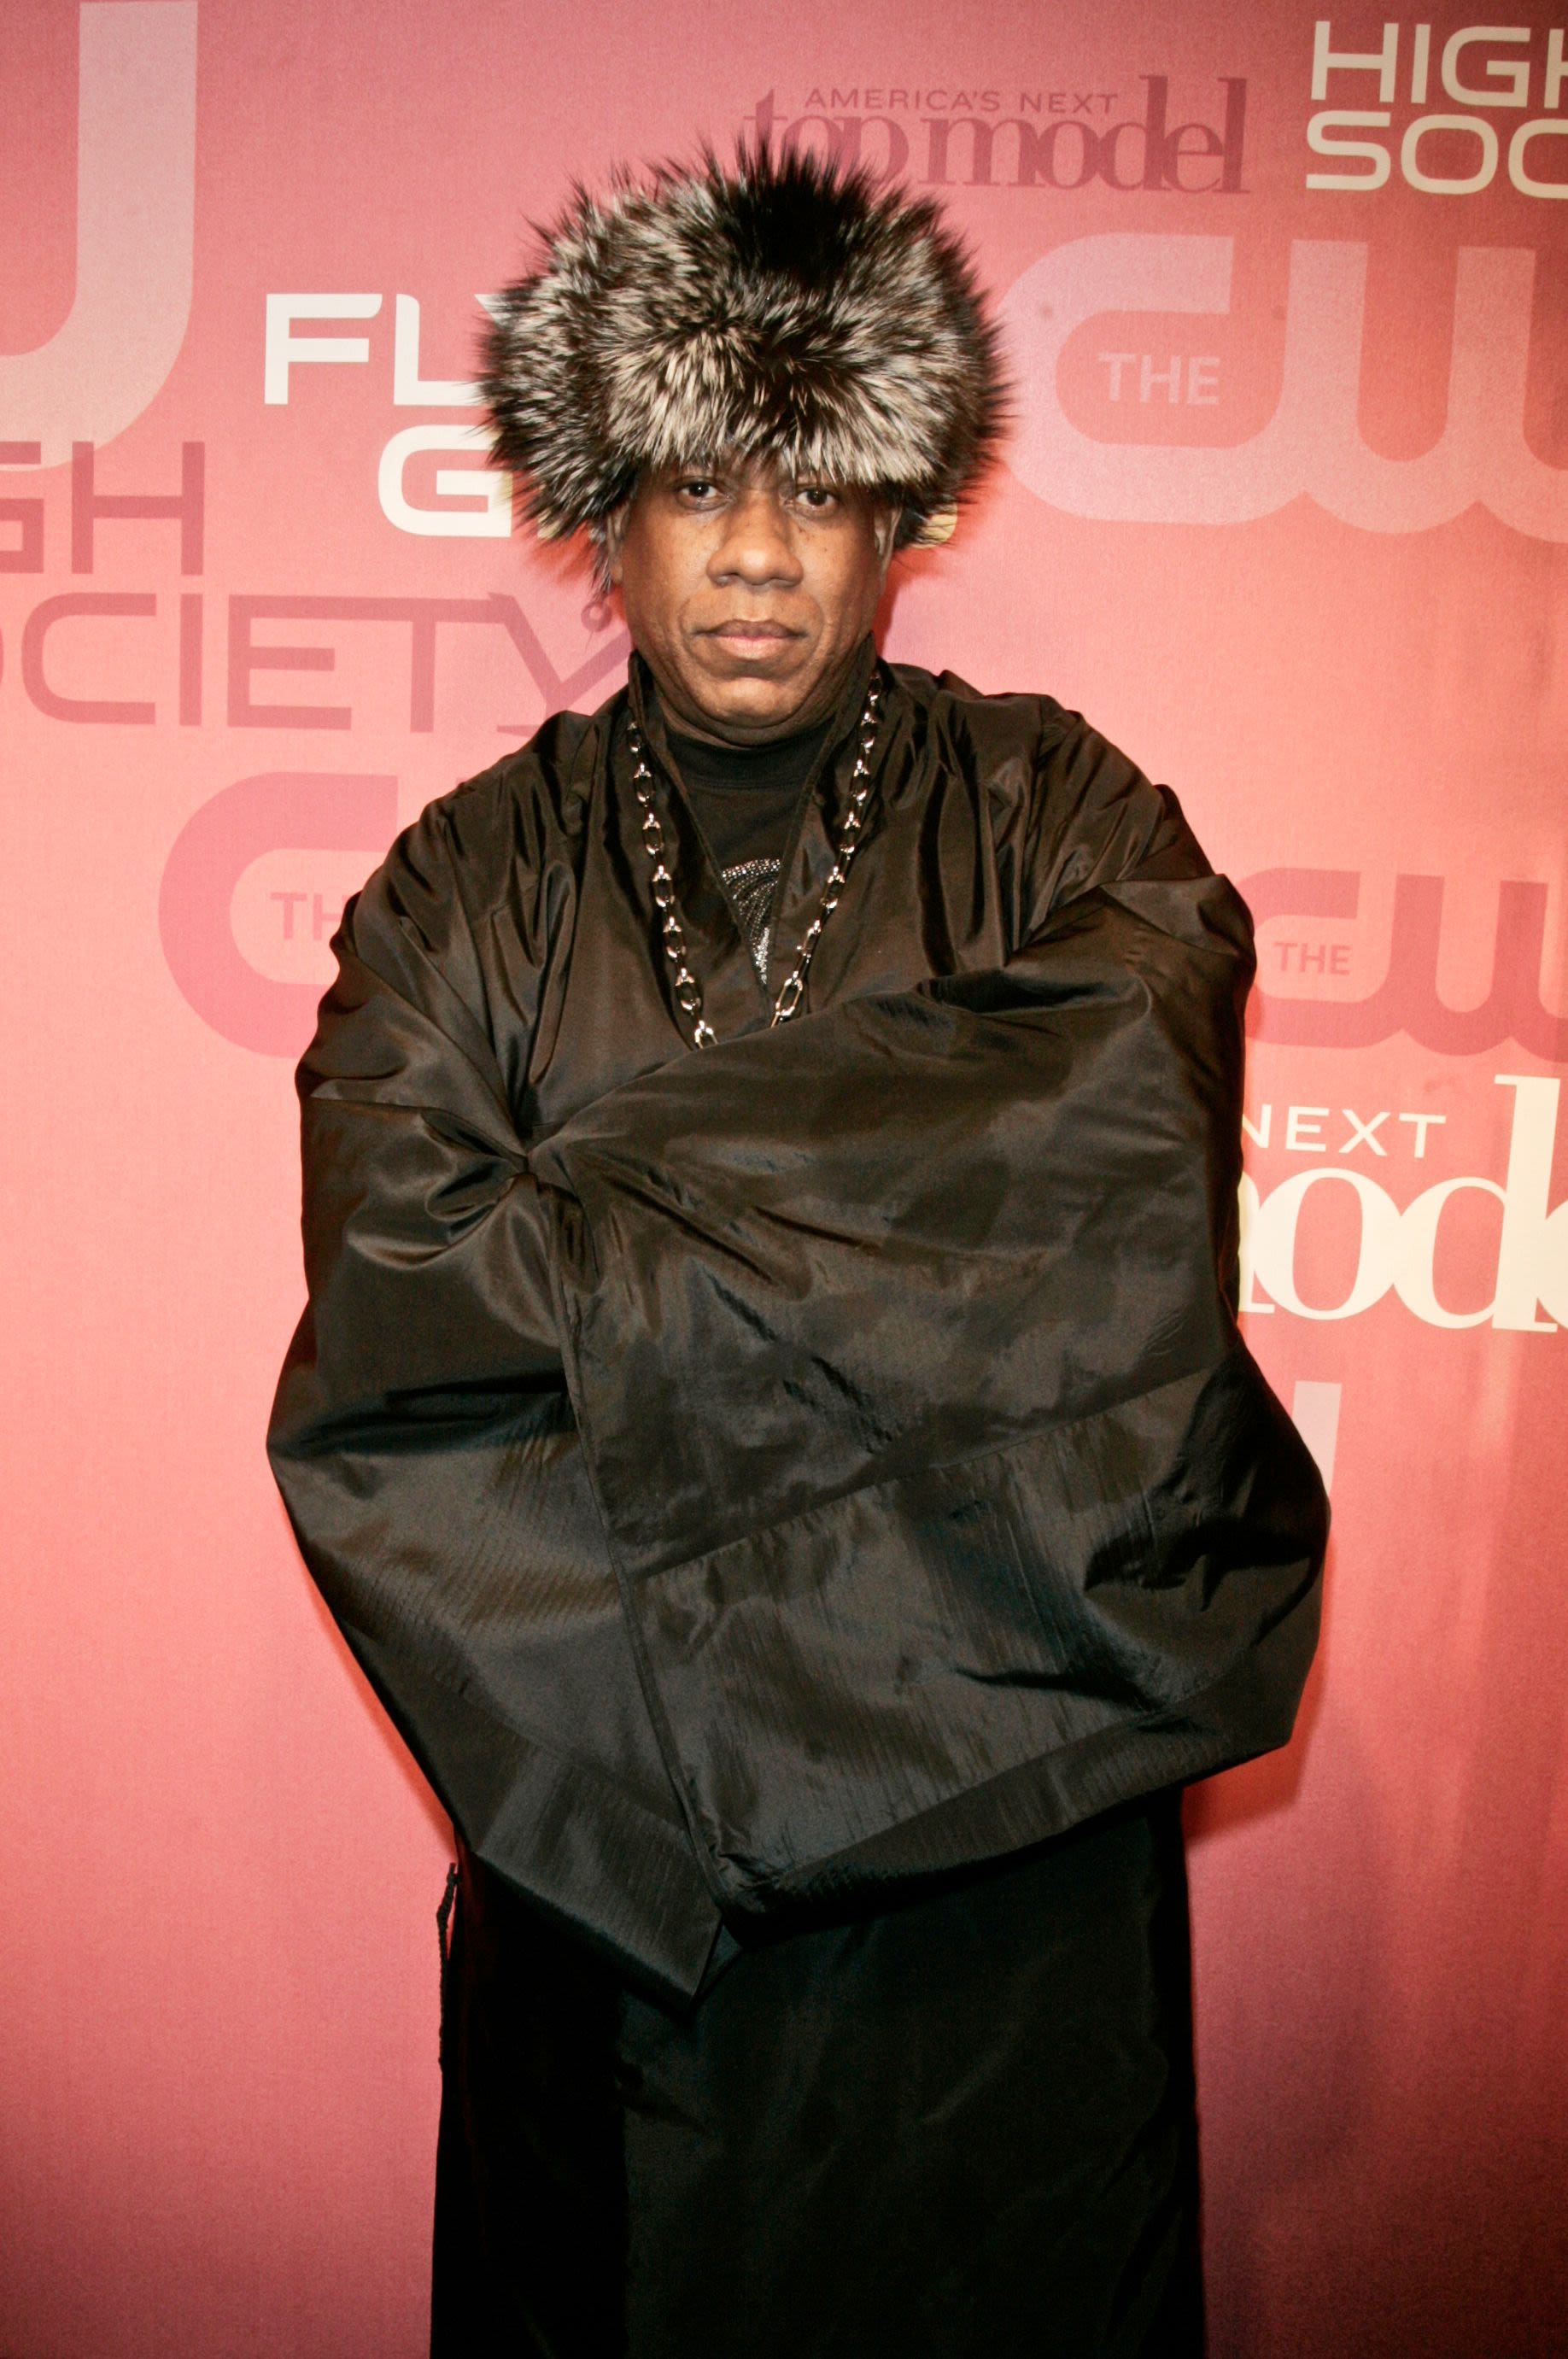 André Leon Talley - Wikipedia